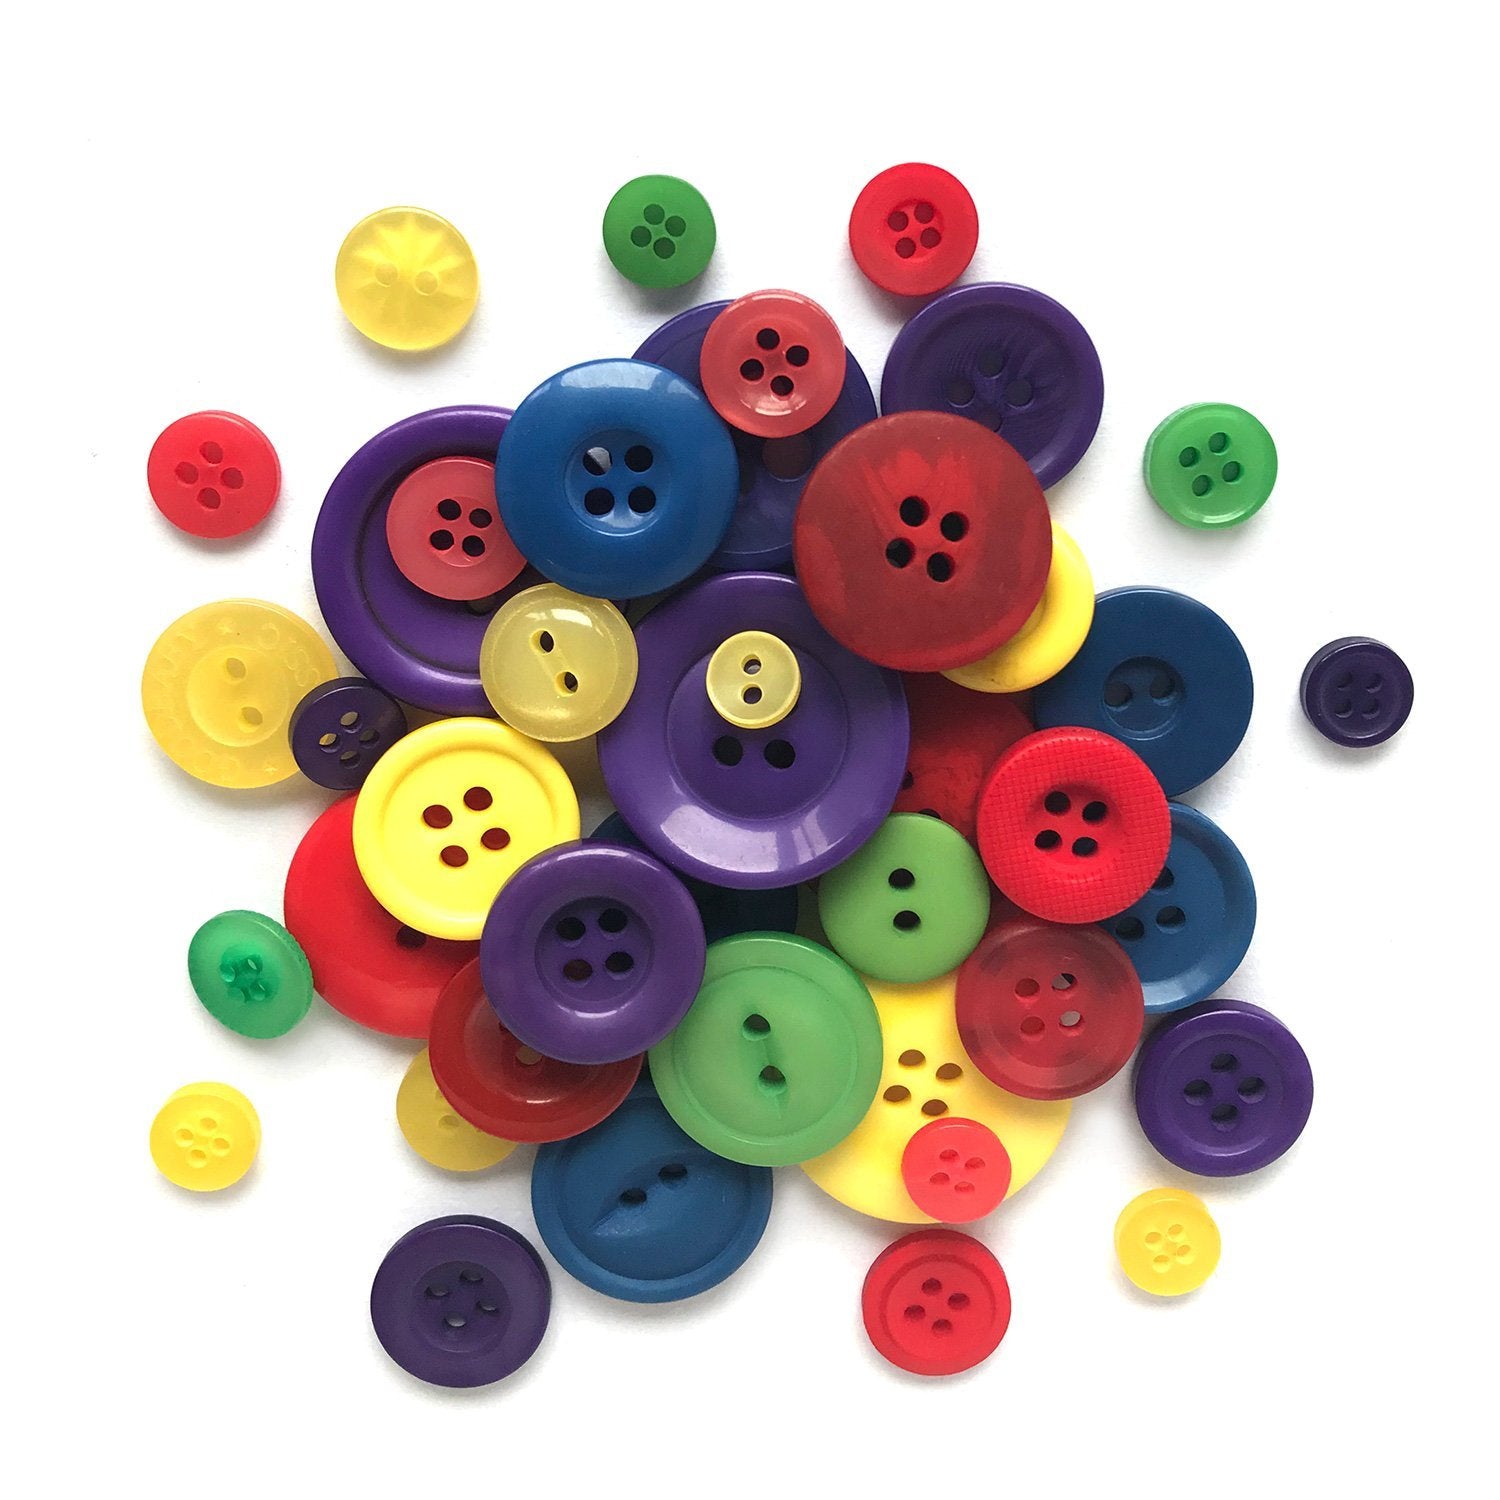 BROWN MIXED BUTTONS / PLASTIC BUTTONS / ASSORTED BUTTON